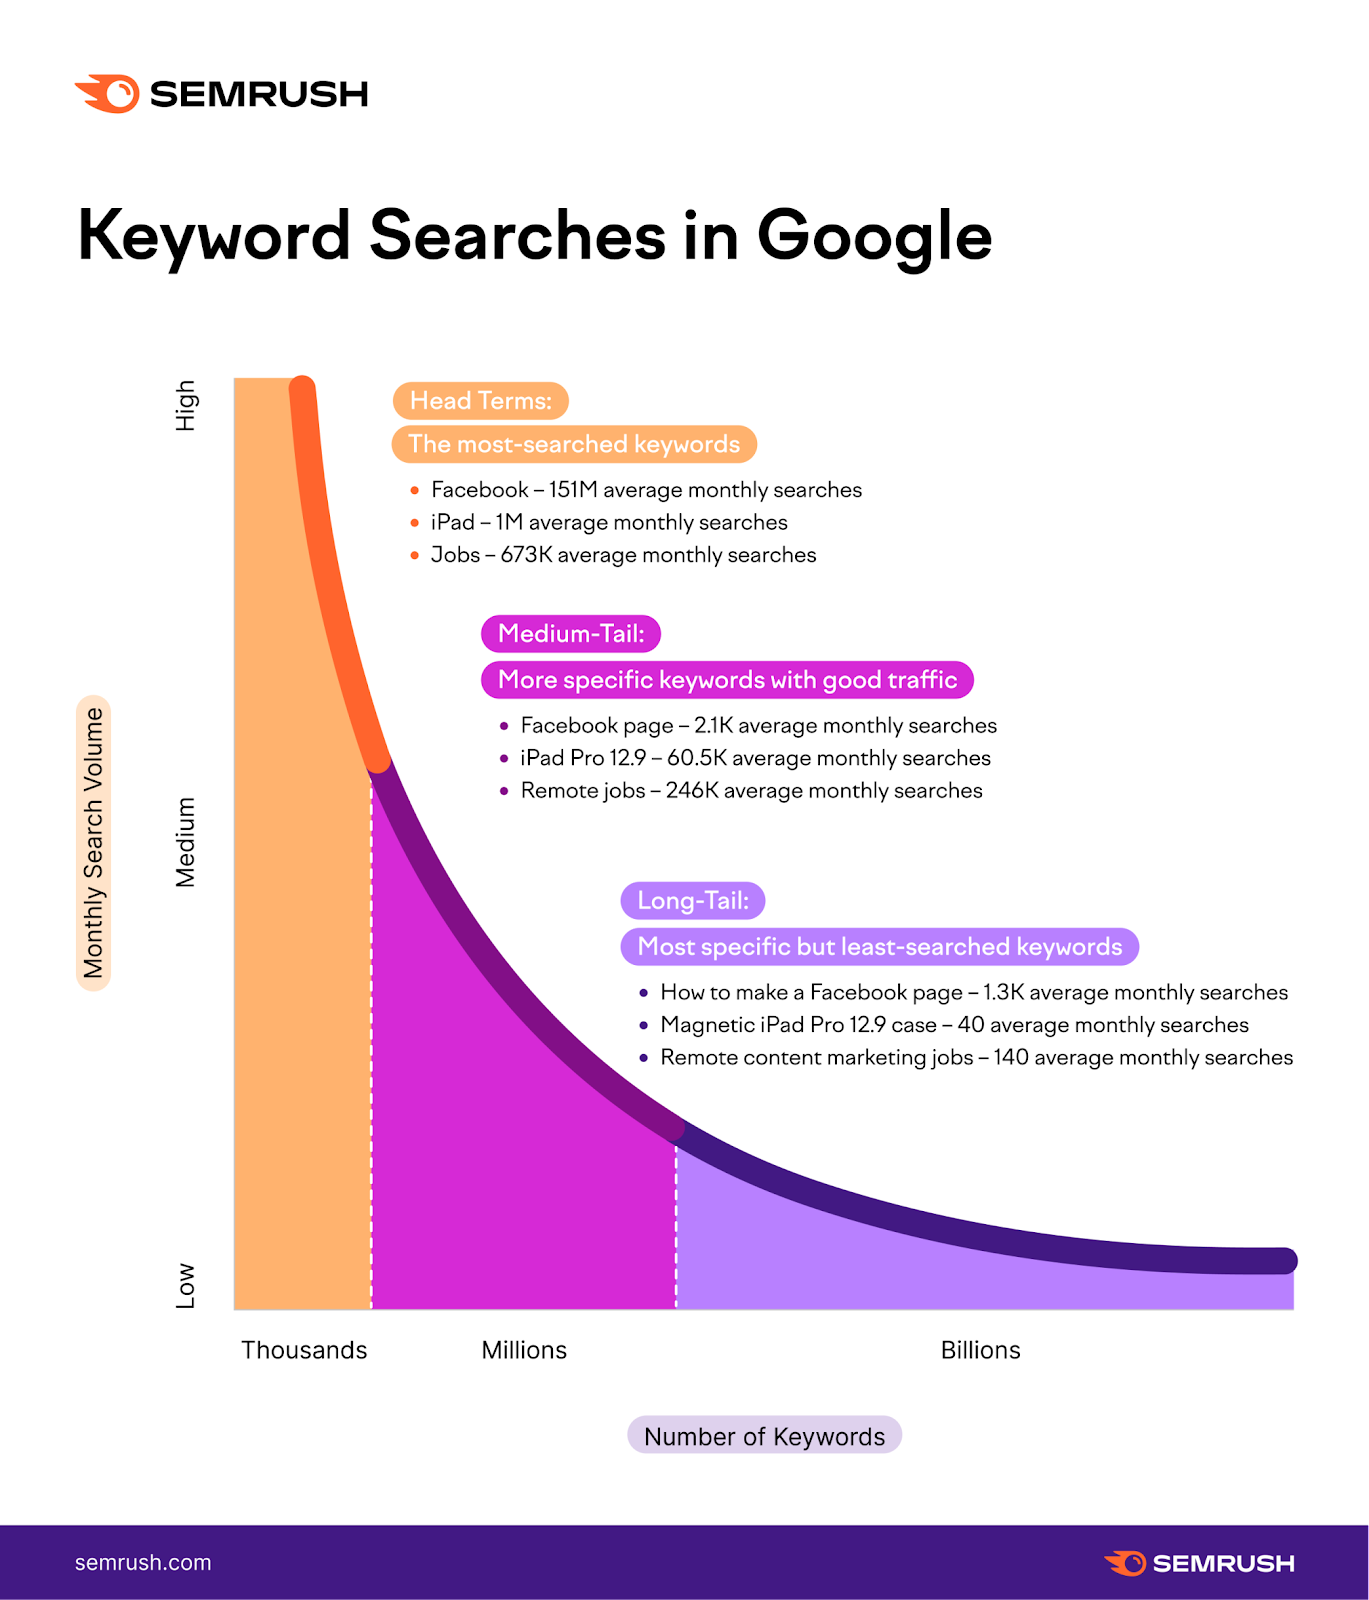 An infographic showing keyword searches in Google